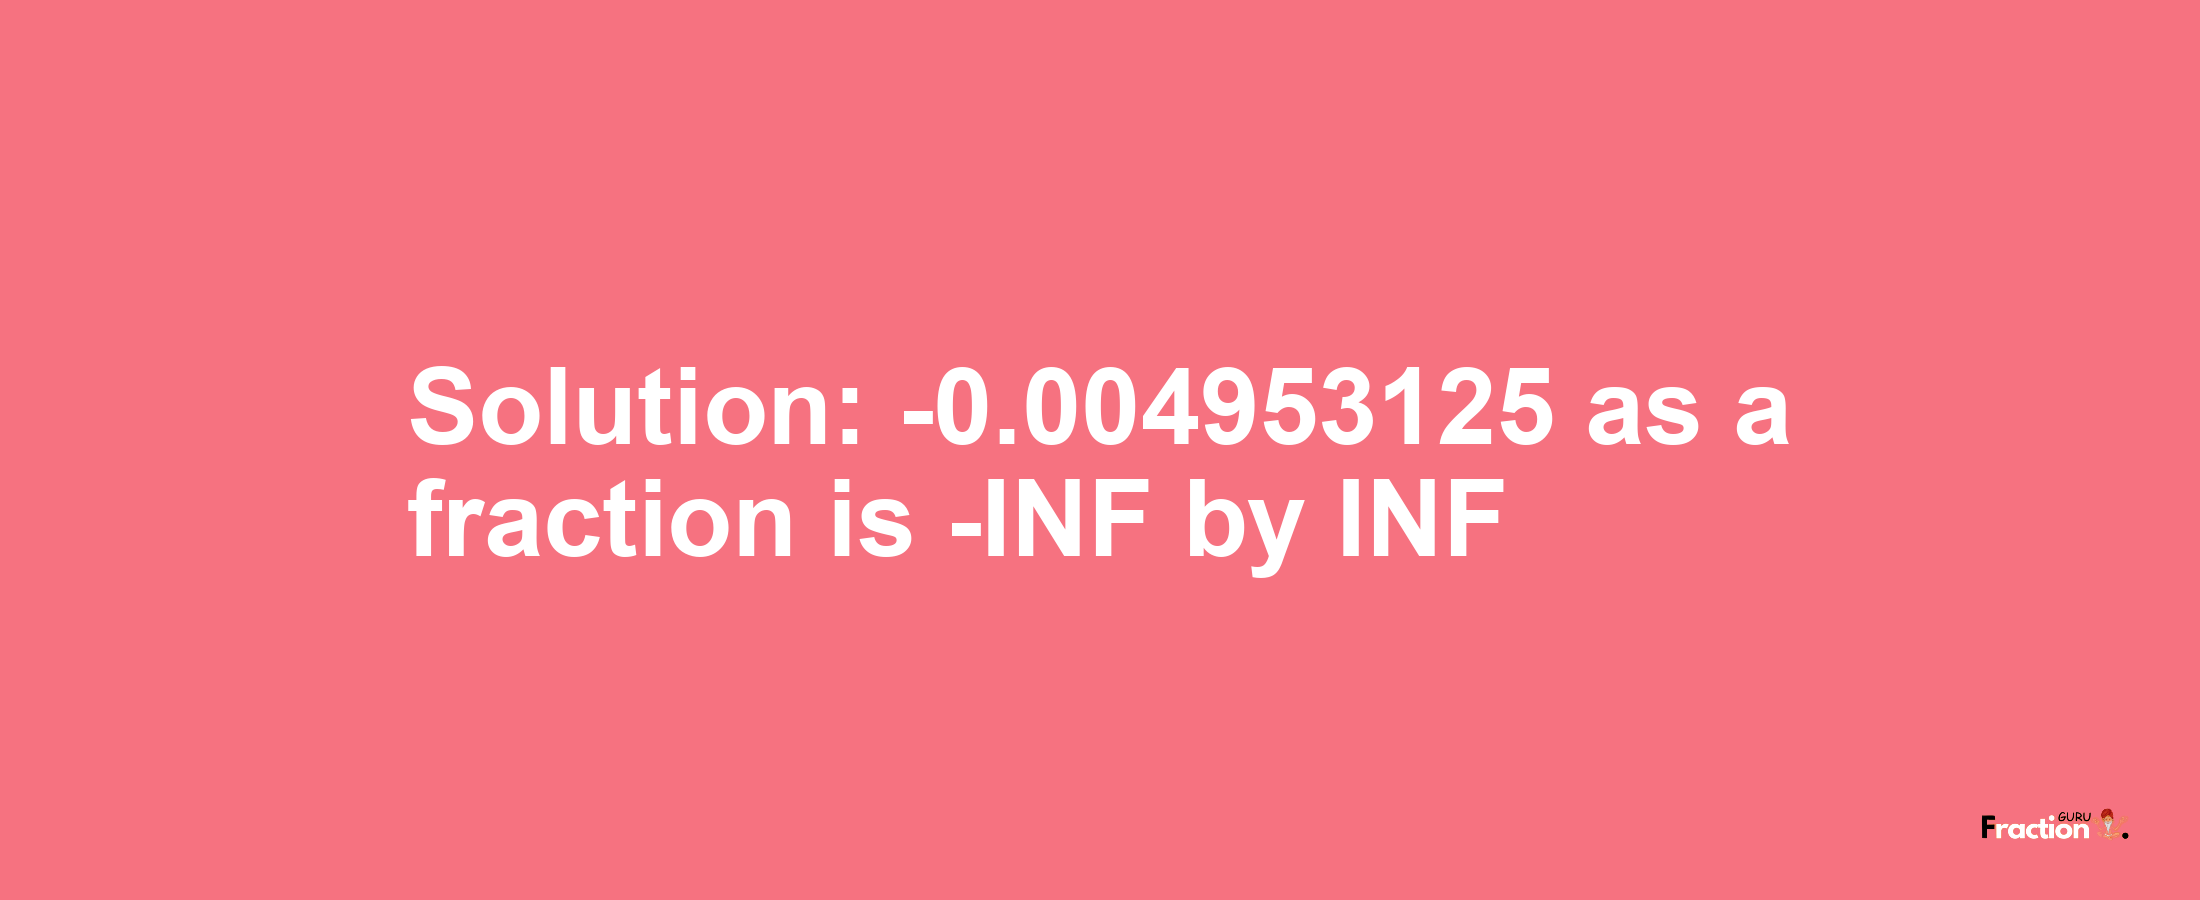 Solution:-0.004953125 as a fraction is -INF/INF